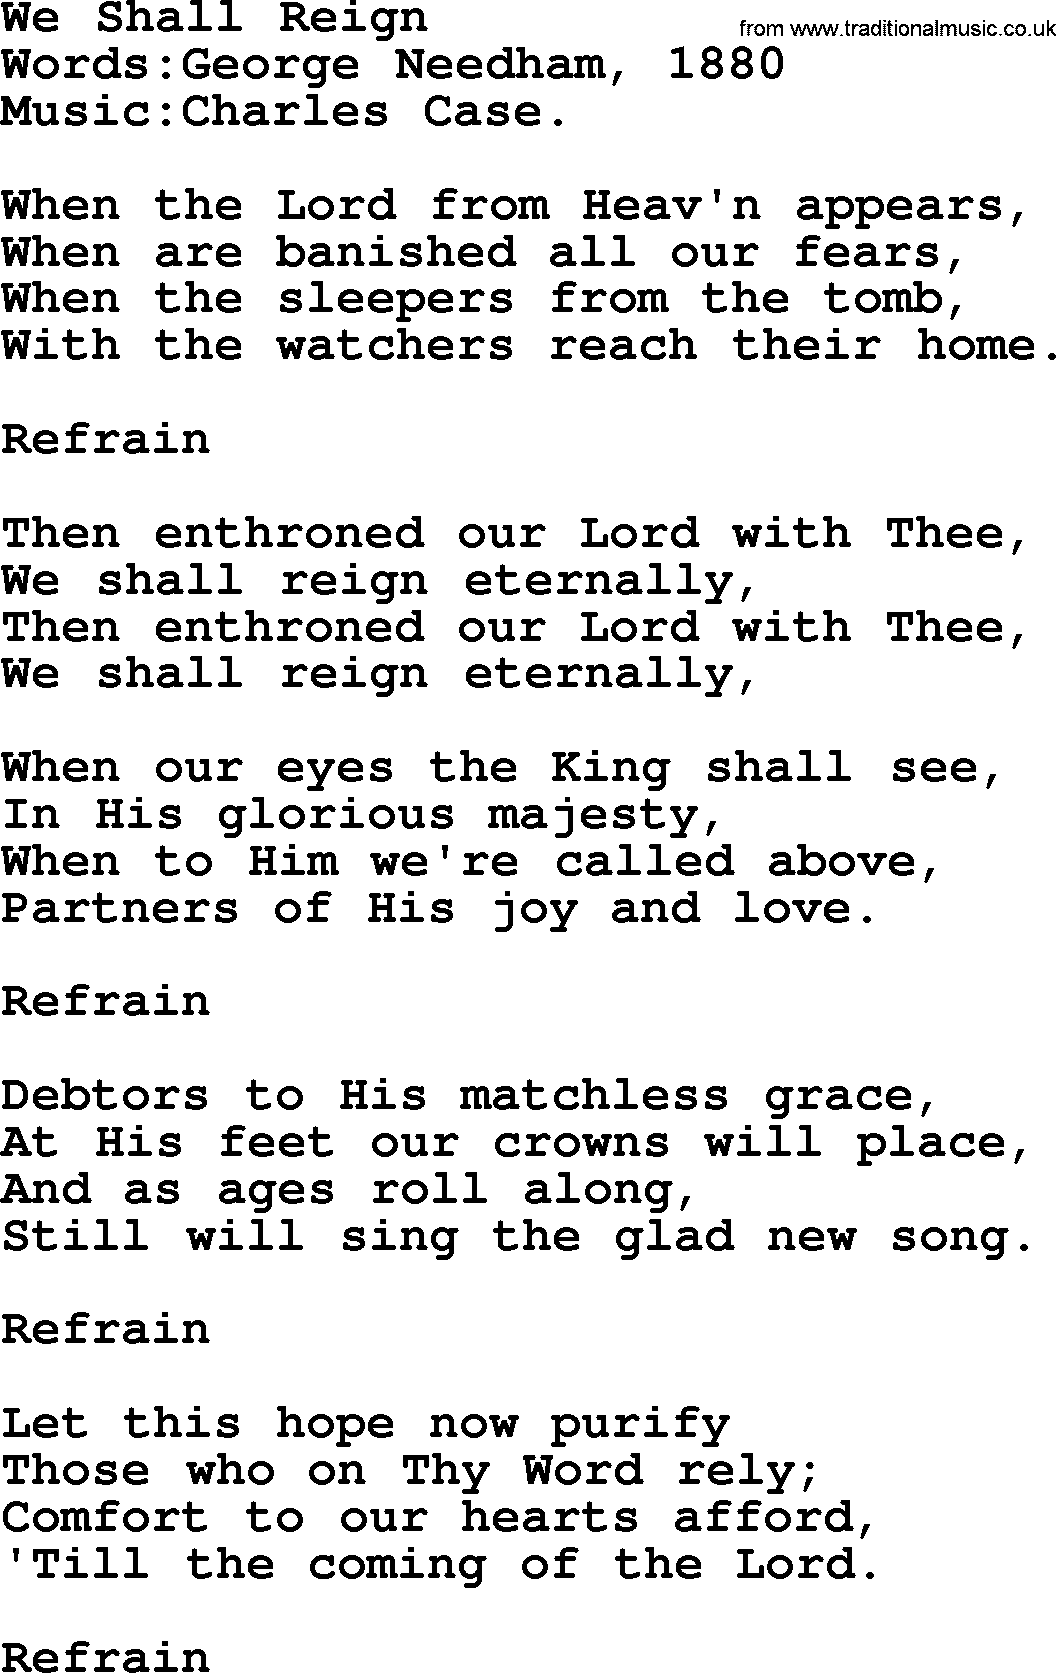 Christian hymns and songs about Jesus' Return(The Second Coming): We Shall Reign, lyrics with PDF